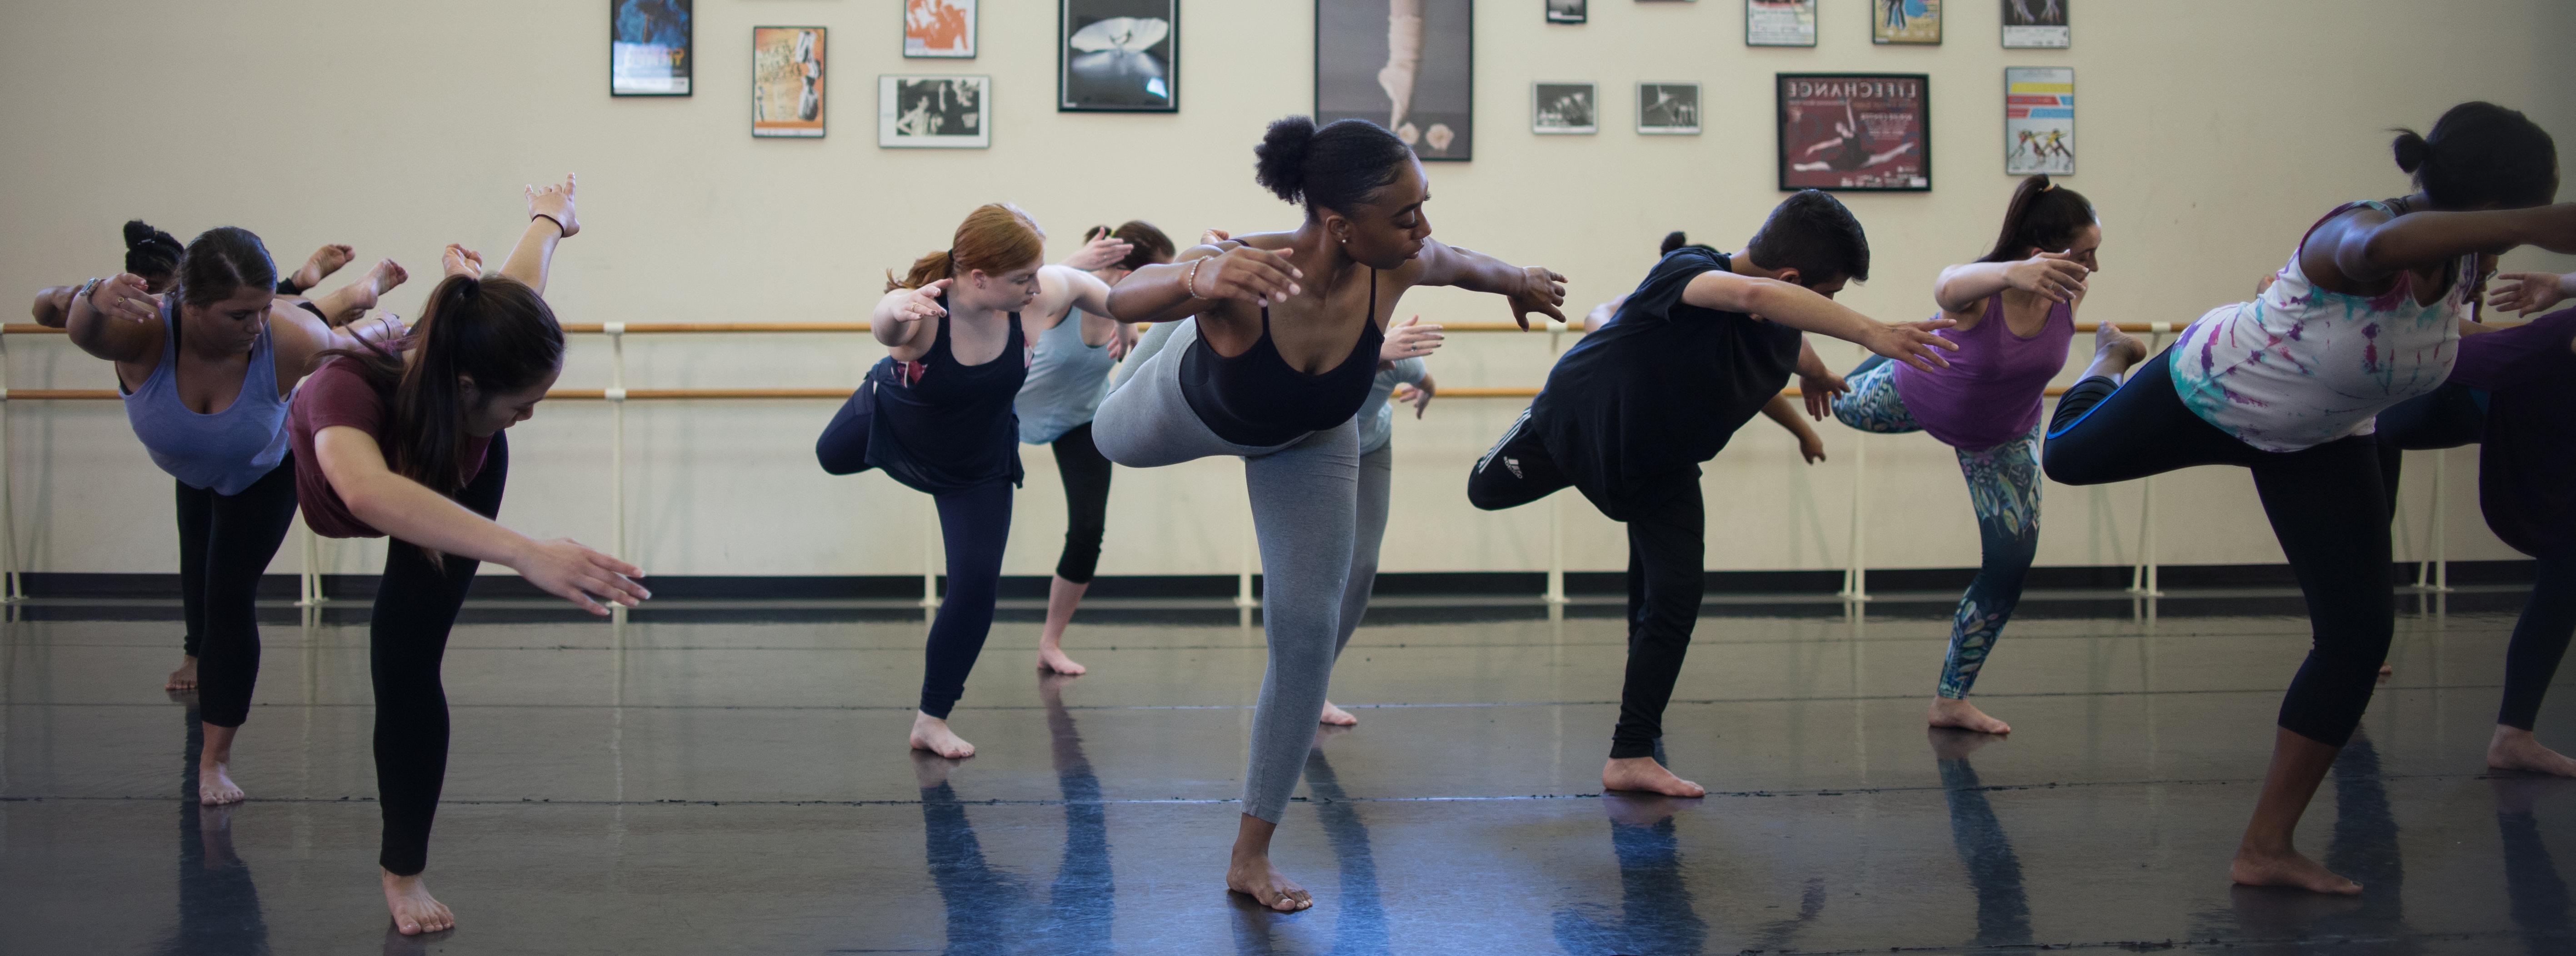 Students in the dance studio practice choreography